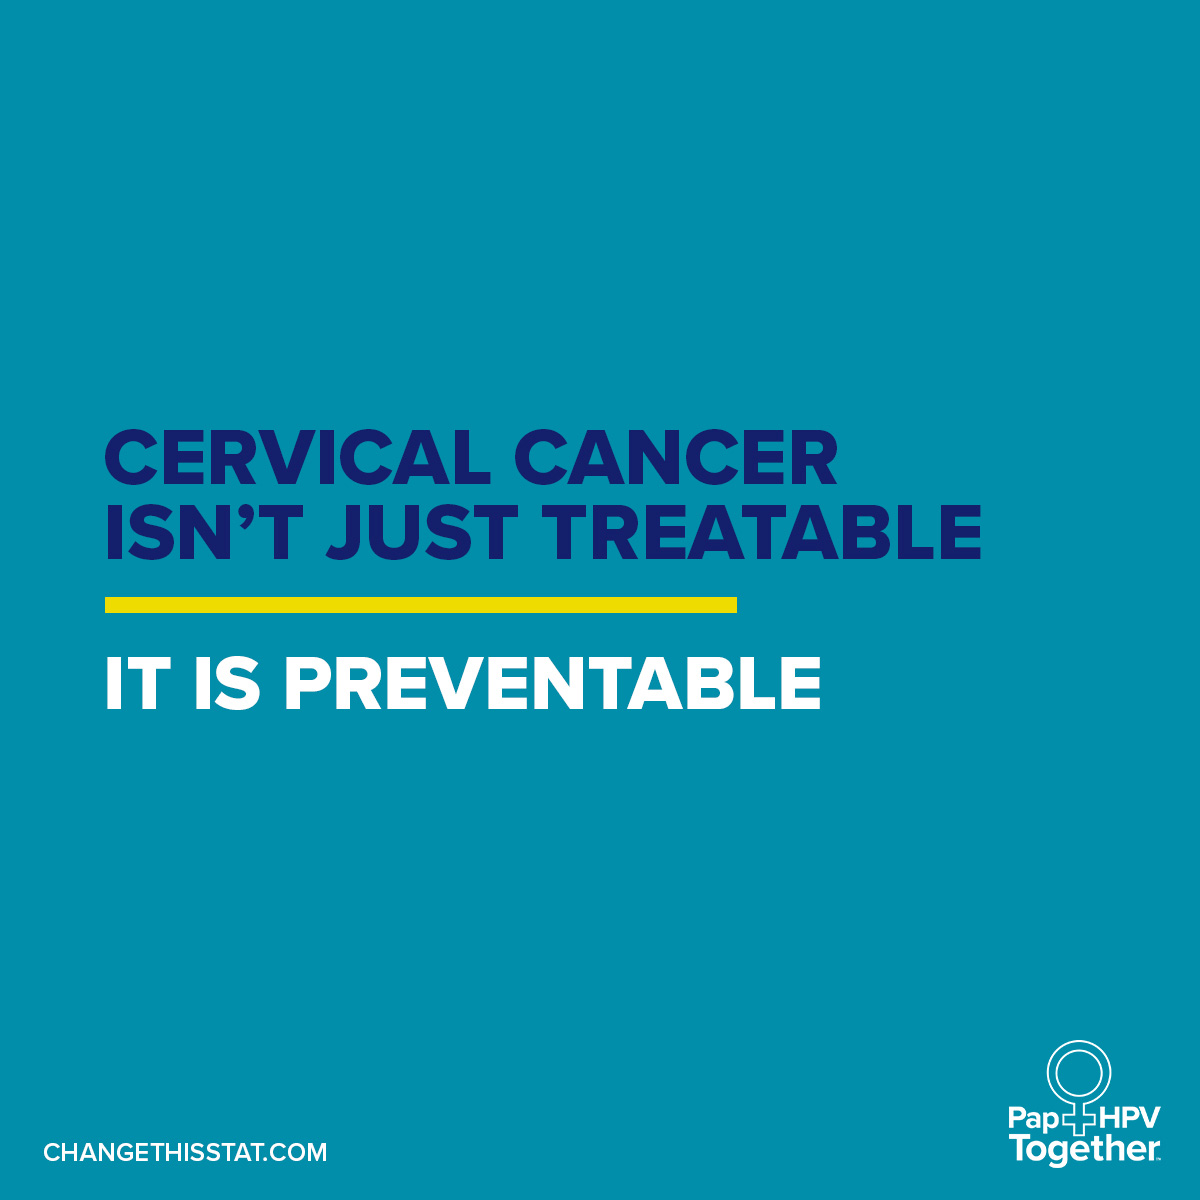 For women between 30 and 65, the preferred screening approach is to test with Pap+HPV Together, which detects 95 percent of cervical cancer cases. Screening with both tests also prevents more cases of pre-cancer than either test used alone.